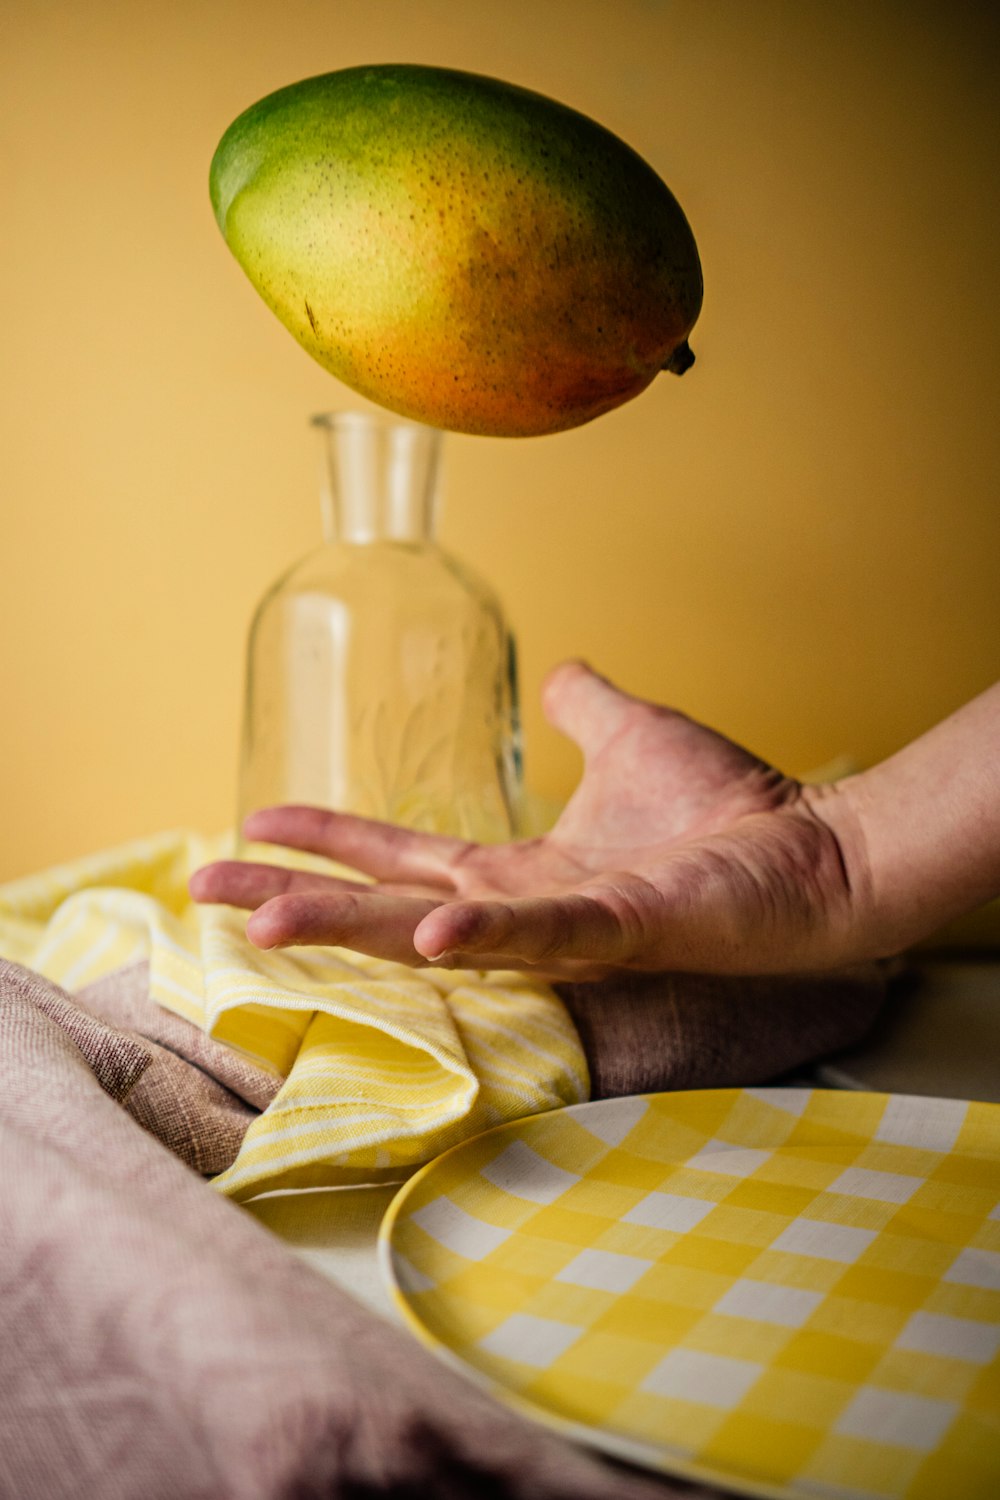 person holding yellow apple fruit